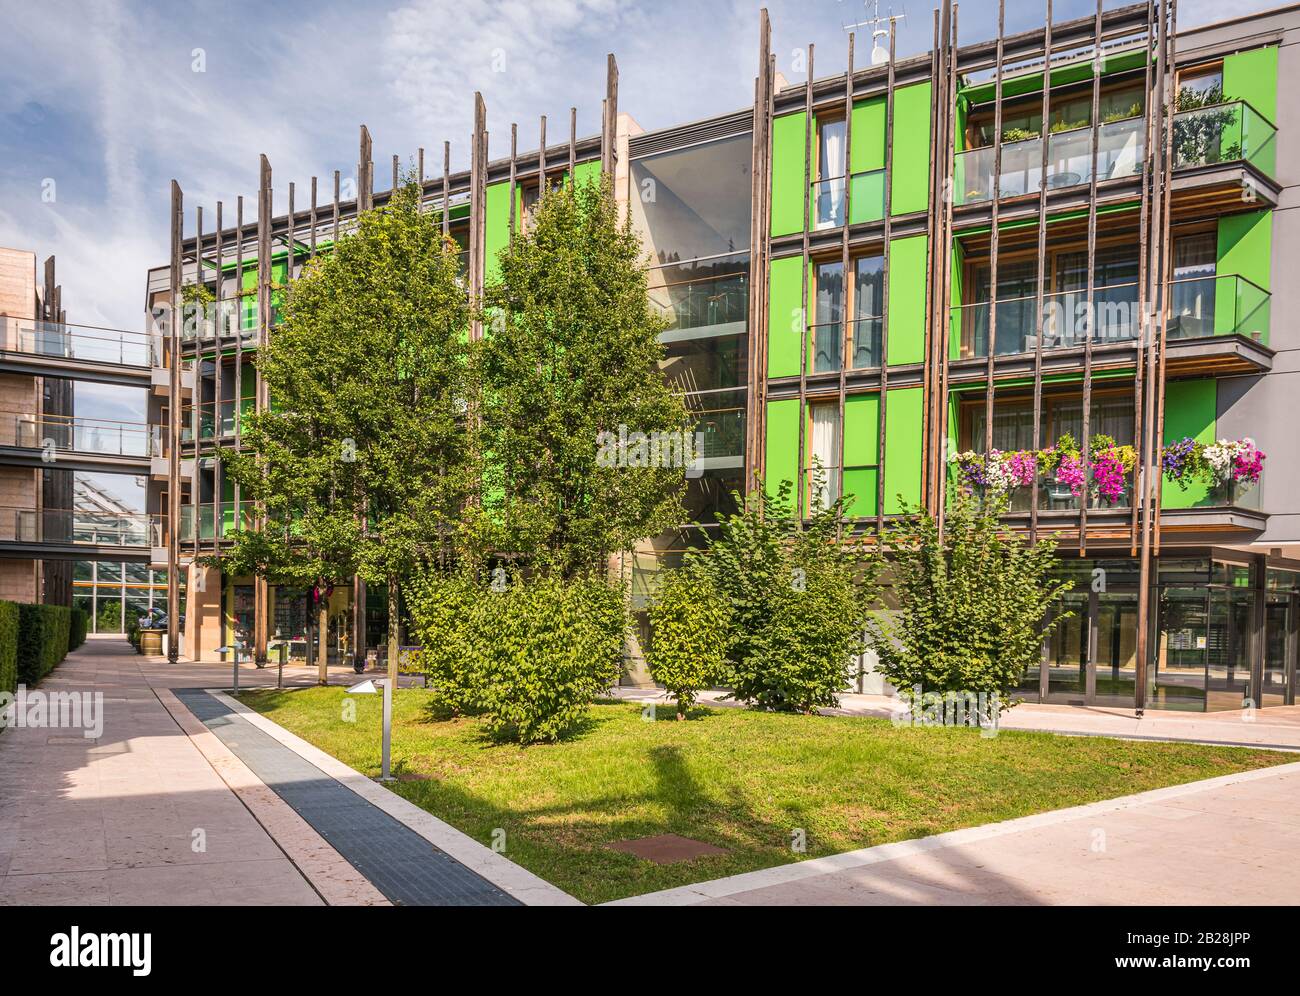 Le Albere residential district  of Trento designed by the famous Italian architect Renzo Piano, year 2013. Stock Photo